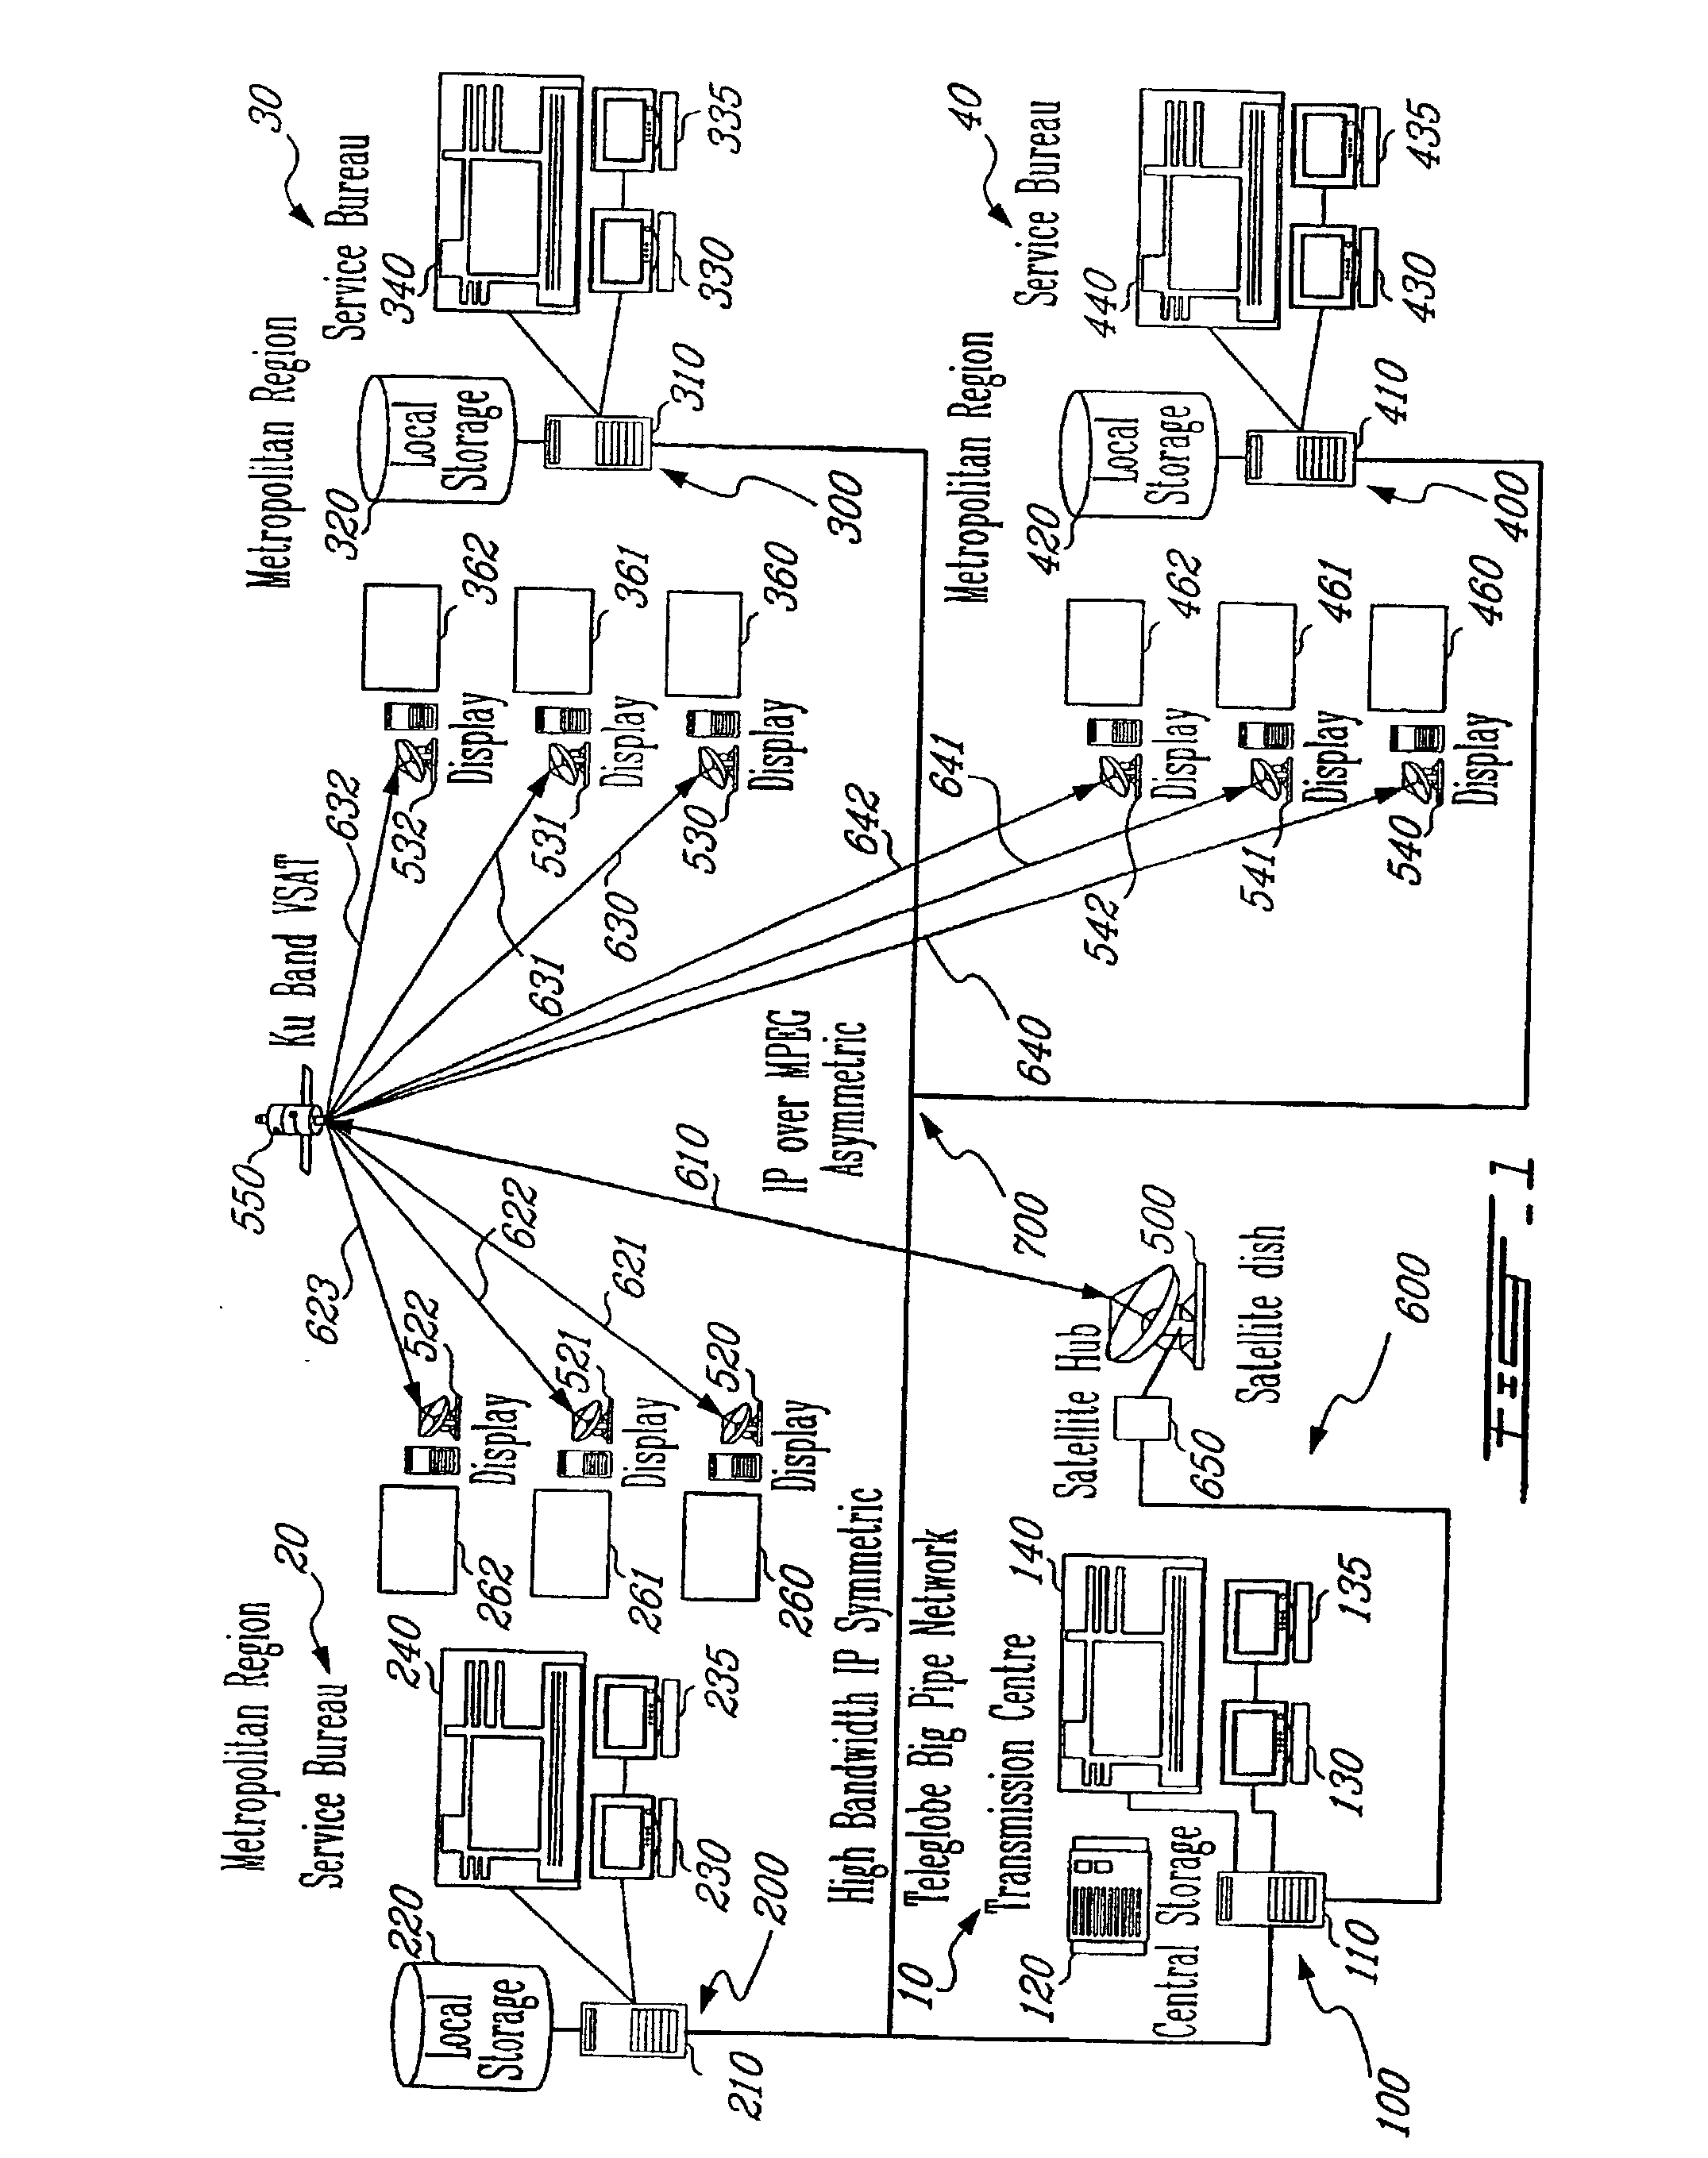 Method and apparatus for the display of selected images at selected times using an autonomous distribution system